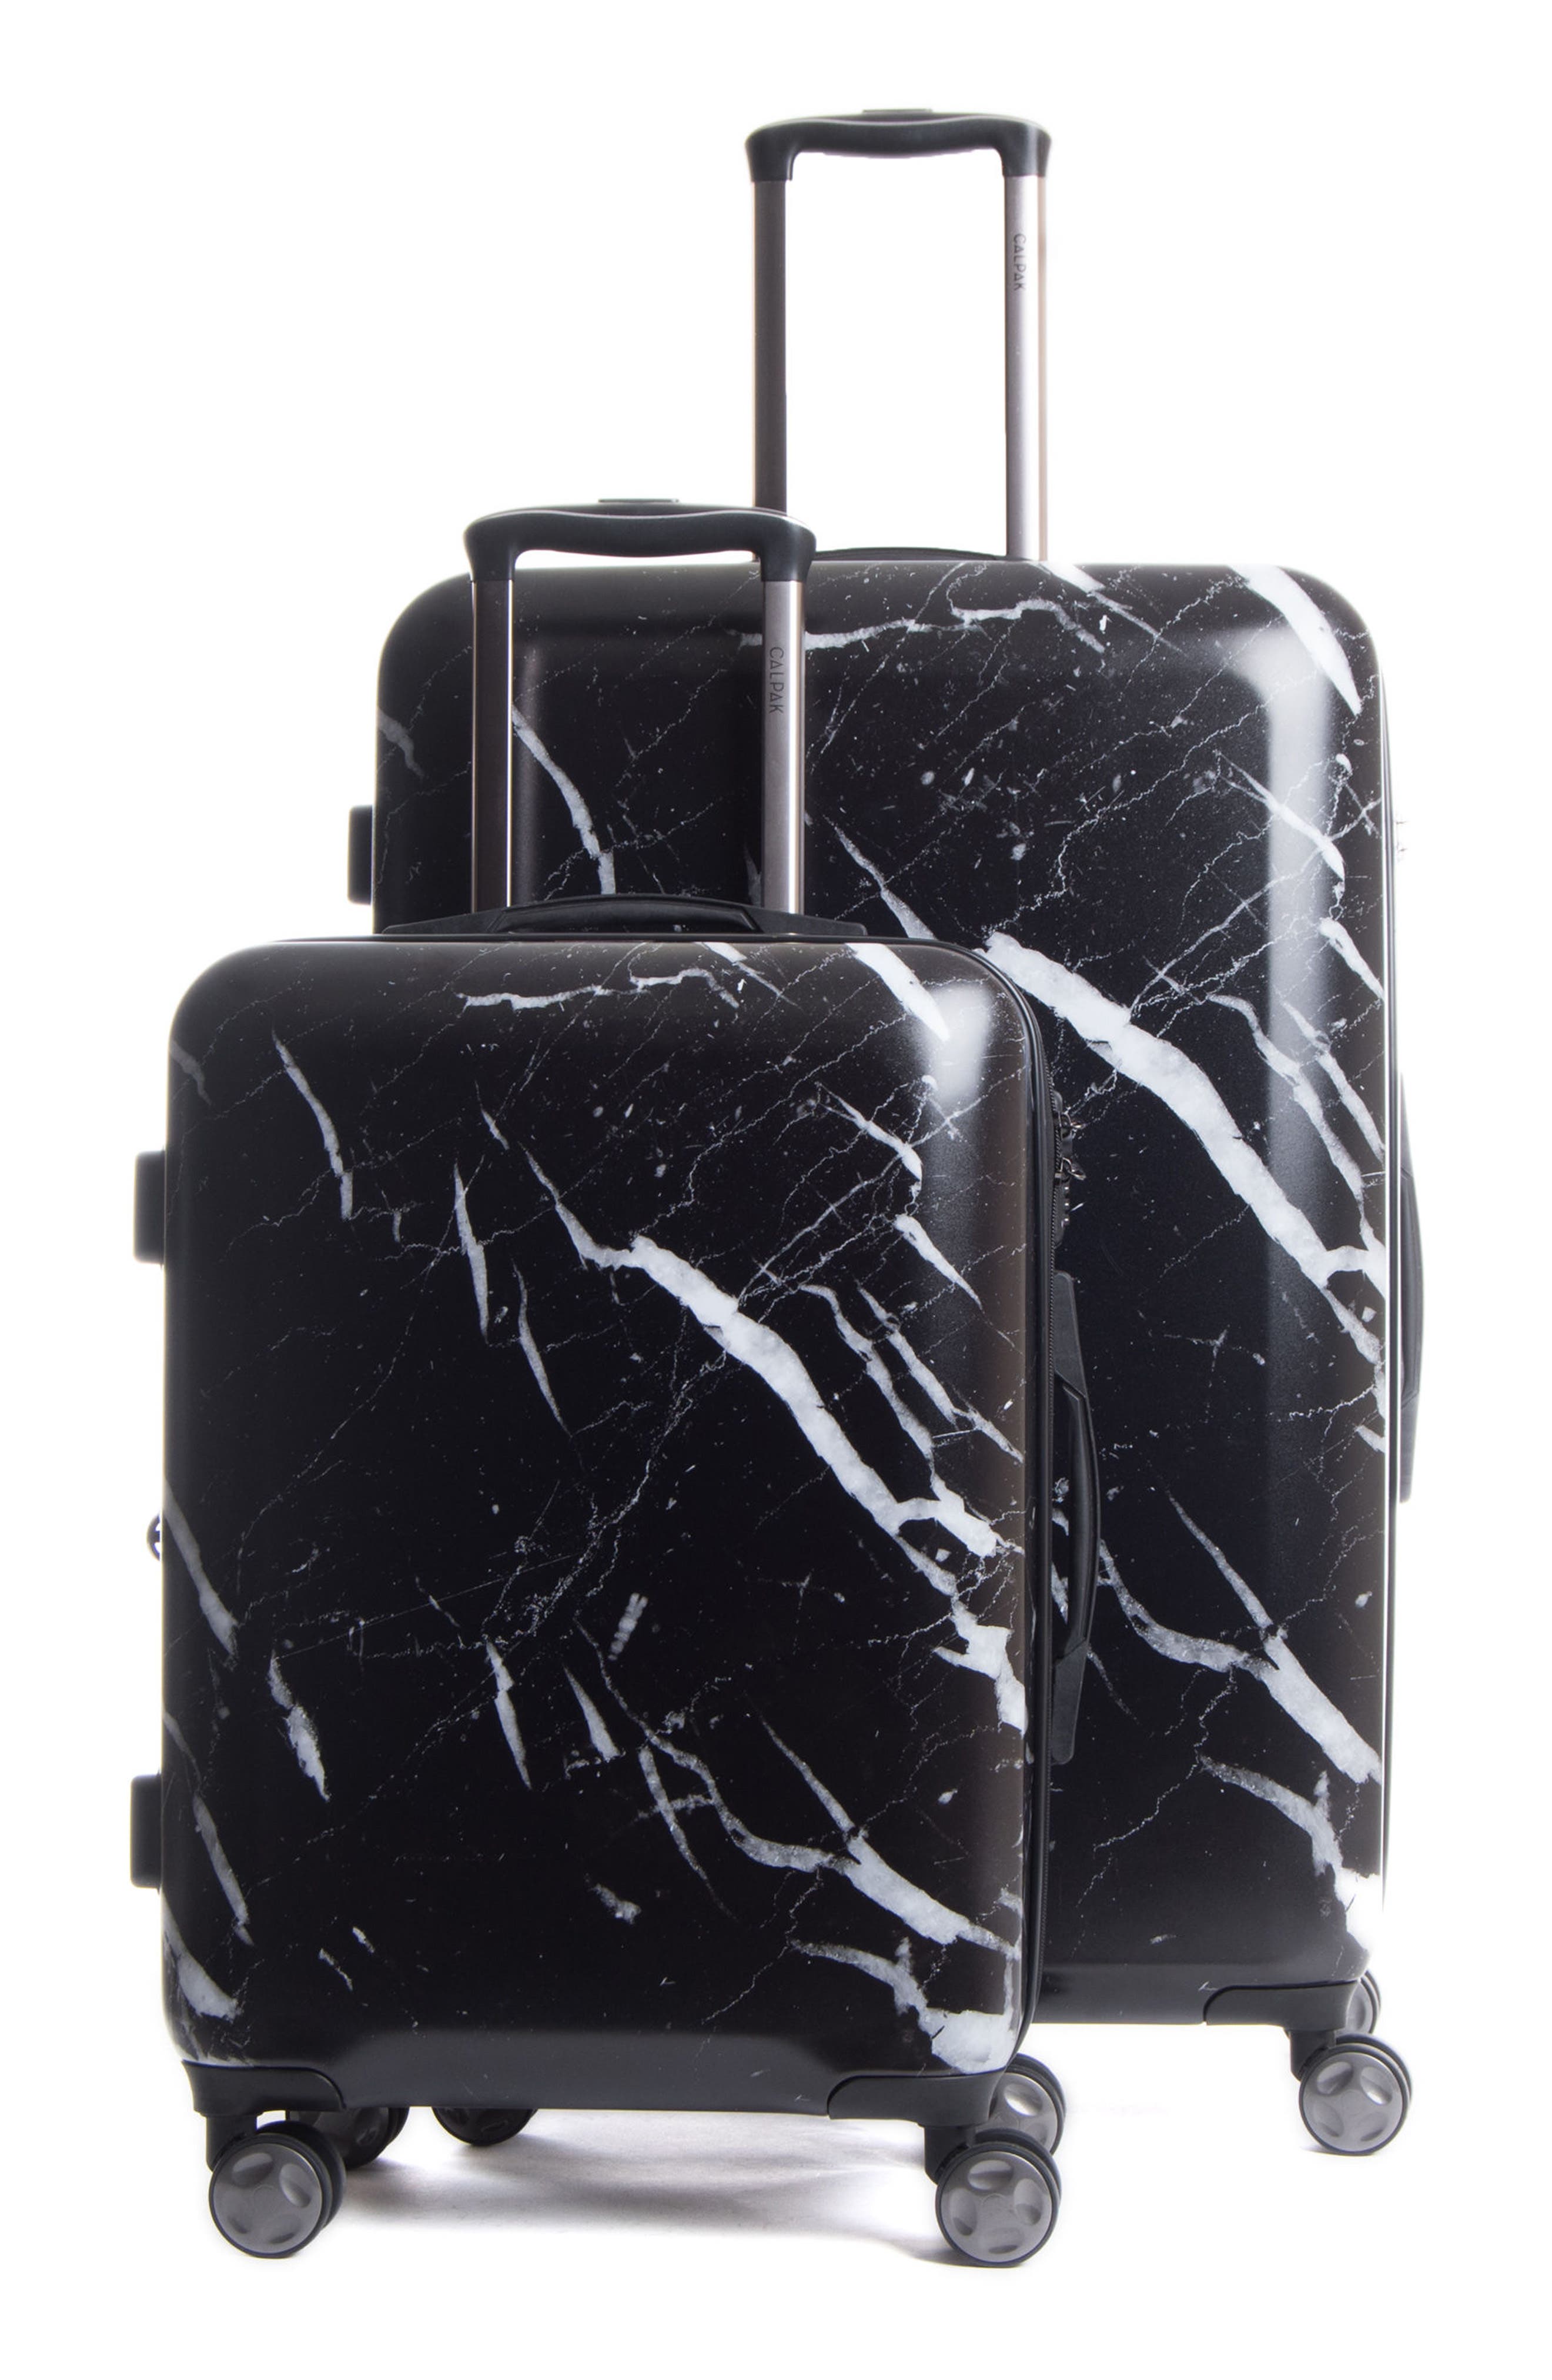 30 inch luggage on sale